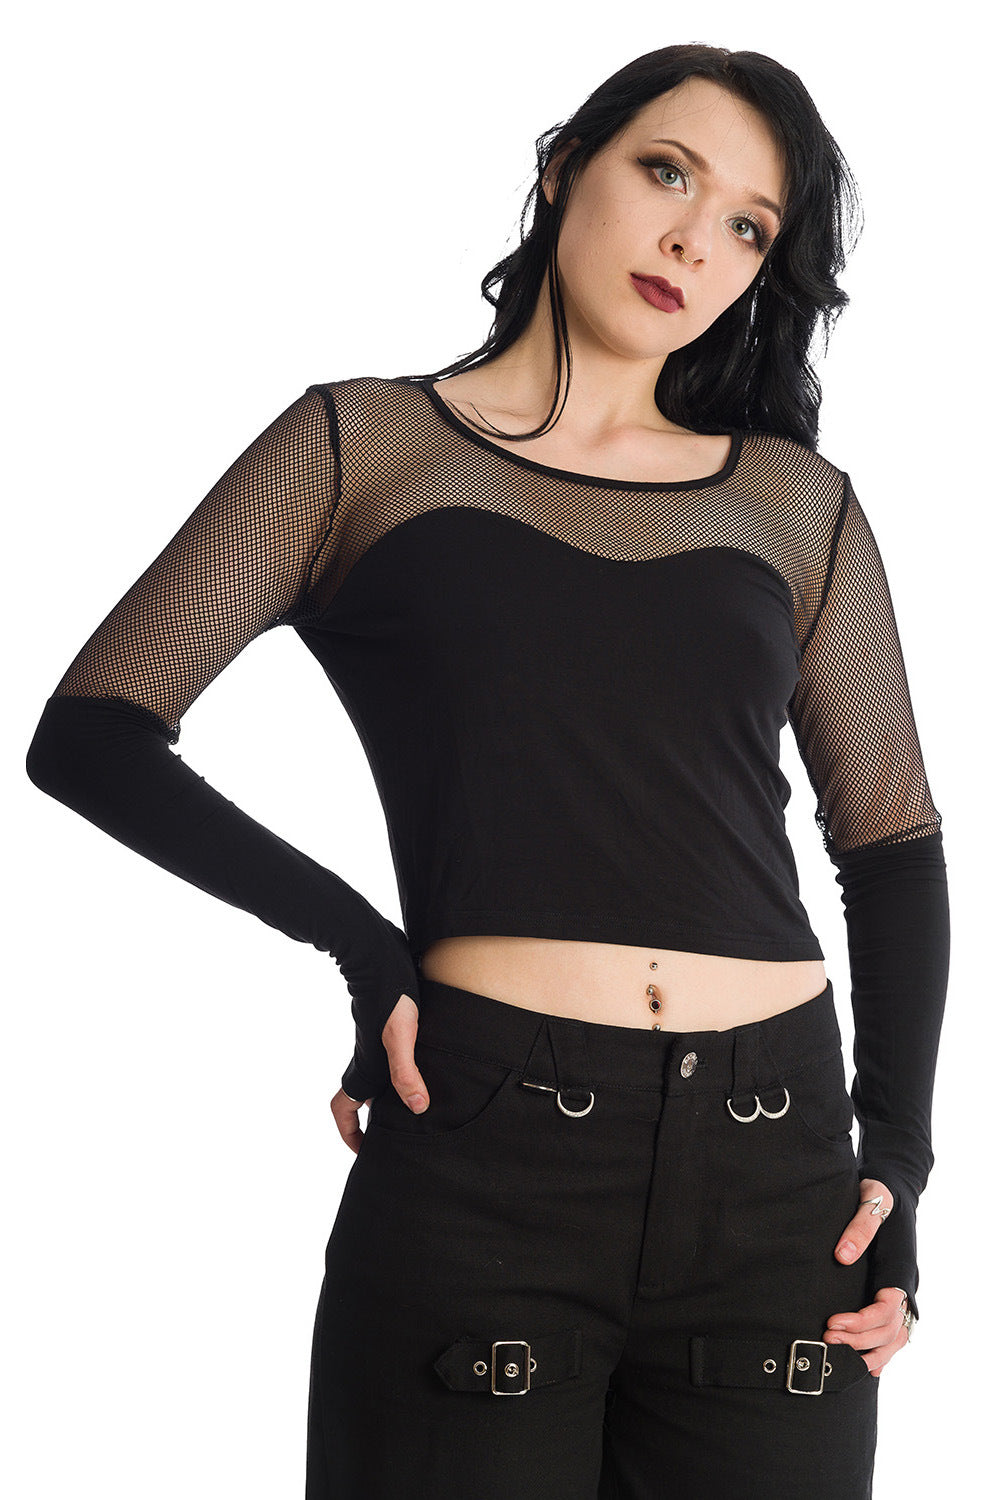 Banned Alternative Dream Me Mesh Top (Plus Only)